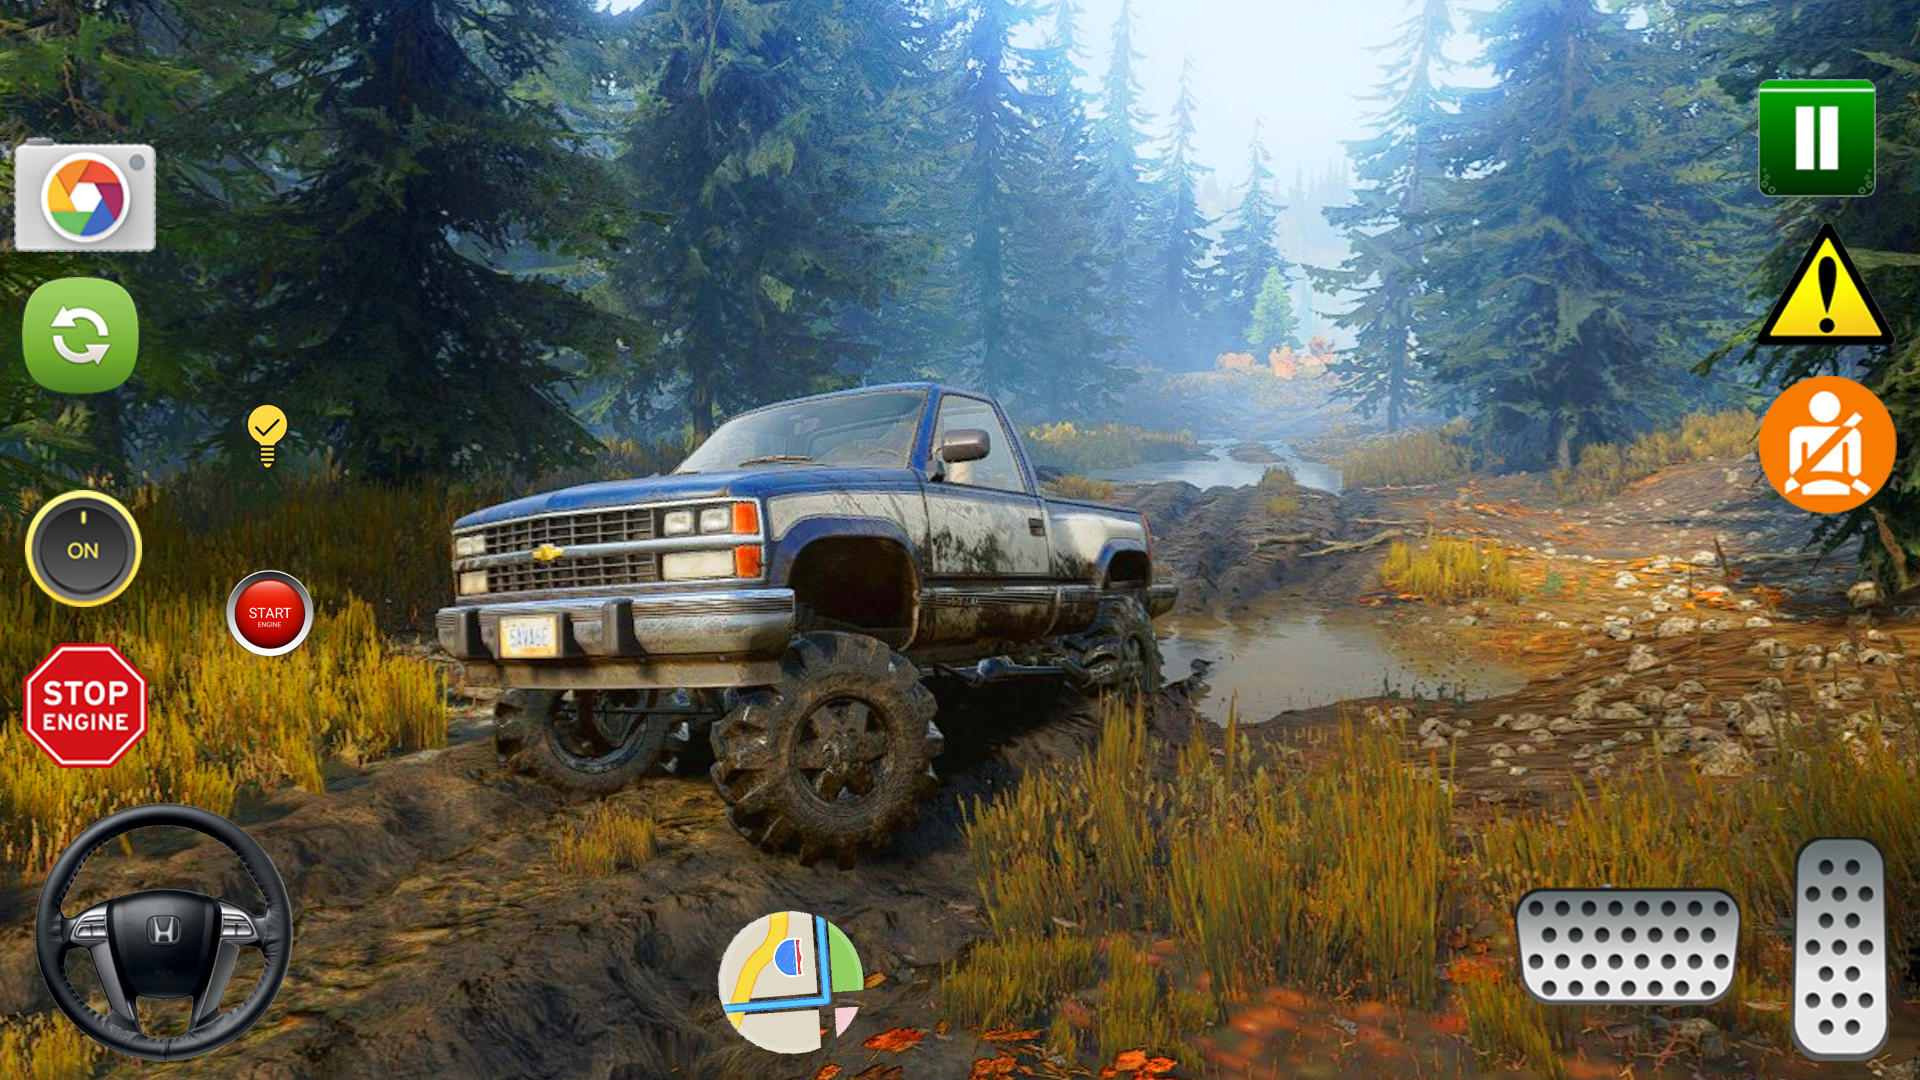 Screenshot 1 of Offroad Jeep Driving Games 3d 0.1